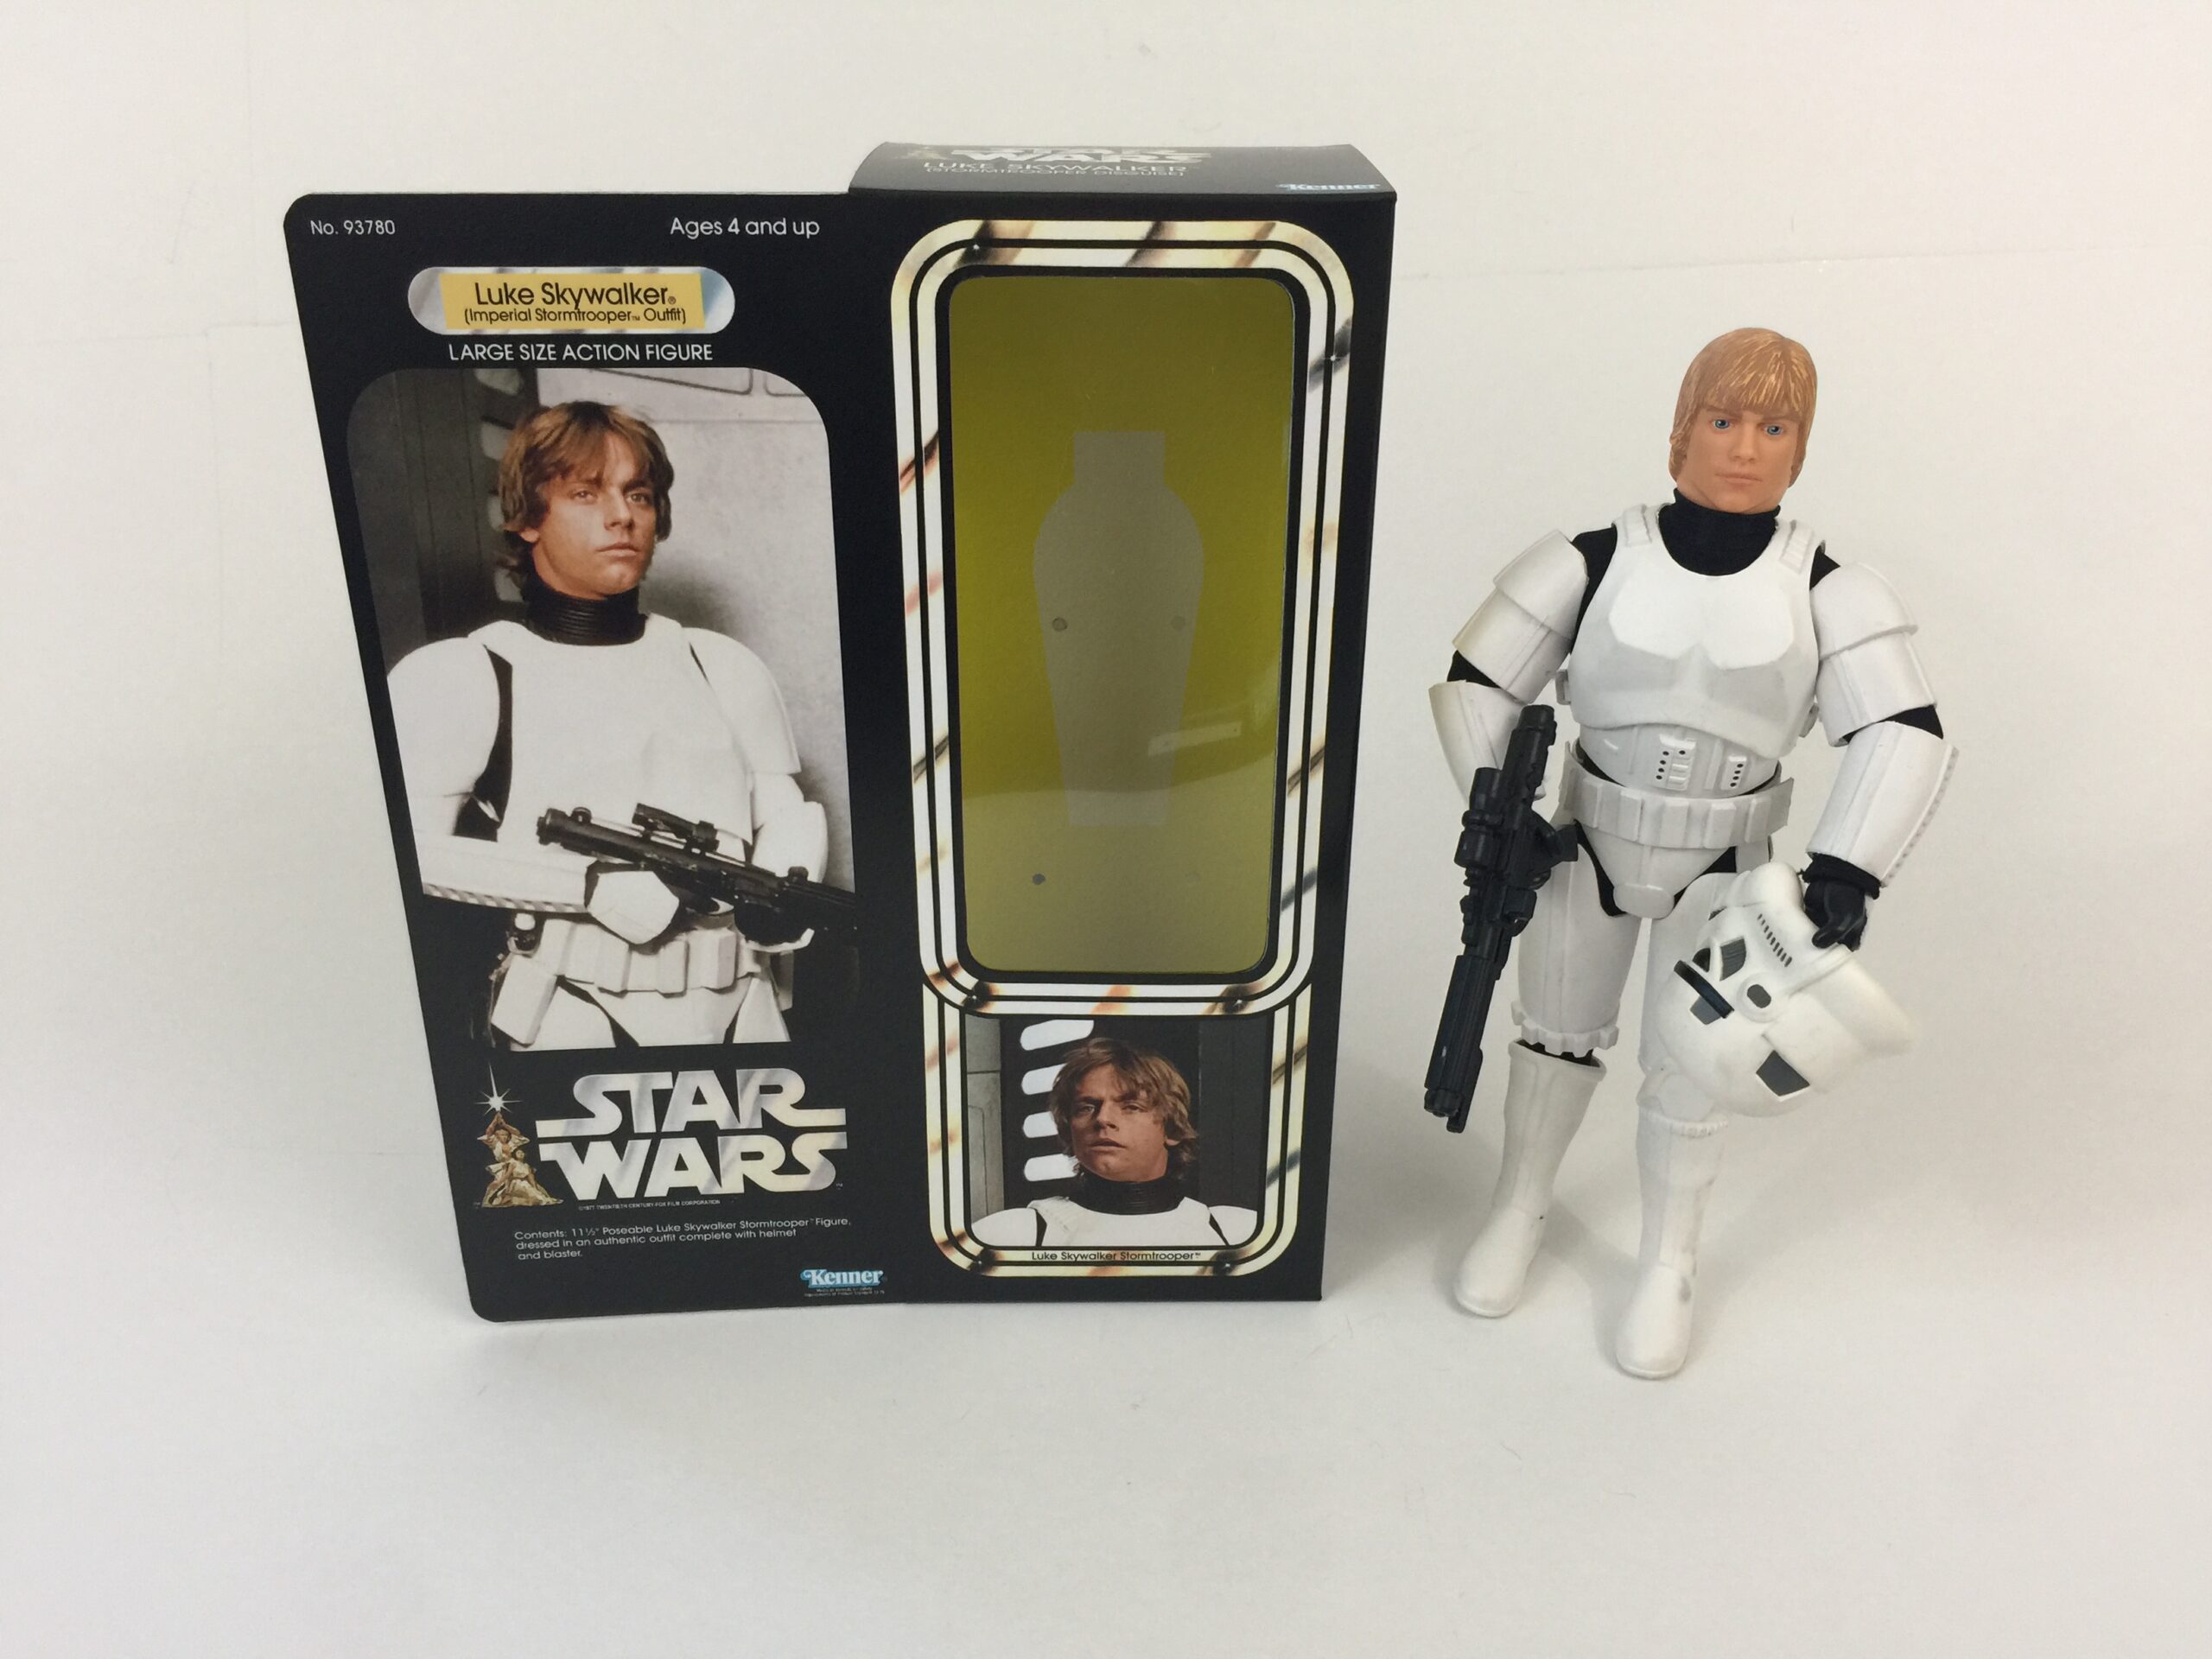 Custom Vintage Wars 12" Luke Skywalker Stormtrooper Disguise and inserts for the modern figure - Replicator Boxes and Inserts